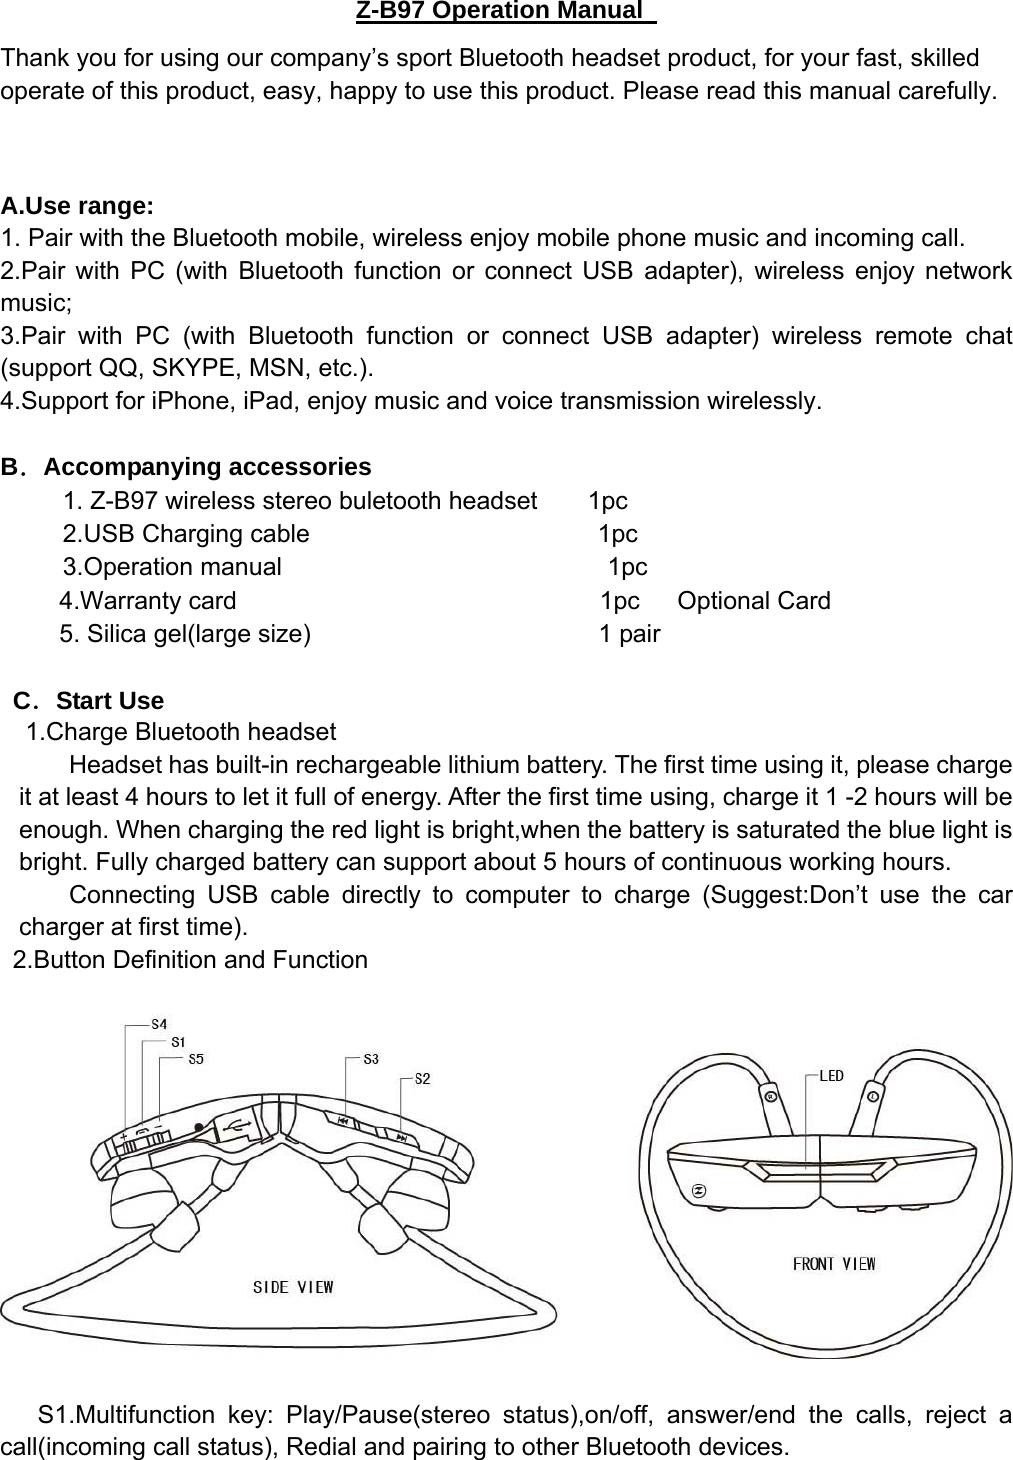    Z-B97 Operation Manual Thank you for using our company’s sport Bluetooth headset product, for your fast, skilled operate of this product, easy, happy to use this product. Please read this manual carefully.  A.Use range:   1. Pair with the Bluetooth mobile, wireless enjoy mobile phone music and incoming call. 2.Pair with PC (with Bluetooth function or connect USB adapter), wireless enjoy network music;  3.Pair with PC (with Bluetooth function or connect USB adapter) wireless remote chat (support QQ, SKYPE, MSN, etc.). 4.Support for iPhone, iPad, enjoy music and voice transmission wirelessly.  B．Accompanying accessories     1. Z-B97 wireless stereo buletooth headset    1pc      2.USB Charging cable                       1pc 3.Operation manual                          1pc 4.Warranty card                             1pc   Optional Card  5. Silica gel(large size)                       1 pair    C．Start Use 1.Charge Bluetooth headset Headset has built-in rechargeable lithium battery. The first time using it, please charge it at least 4 hours to let it full of energy. After the first time using, charge it 1 -2 hours will be enough. When charging the red light is bright,when the battery is saturated the blue light is bright. Fully charged battery can support about 5 hours of continuous working hours. Connecting USB cable directly to computer to charge (Suggest:Don’t use the car charger at first time).   2.Button Definition and Function   S1.Multifunction key: Play/Pause(stereo status),on/off, answer/end the calls, reject a call(incoming call status), Redial and pairing to other Bluetooth devices. 